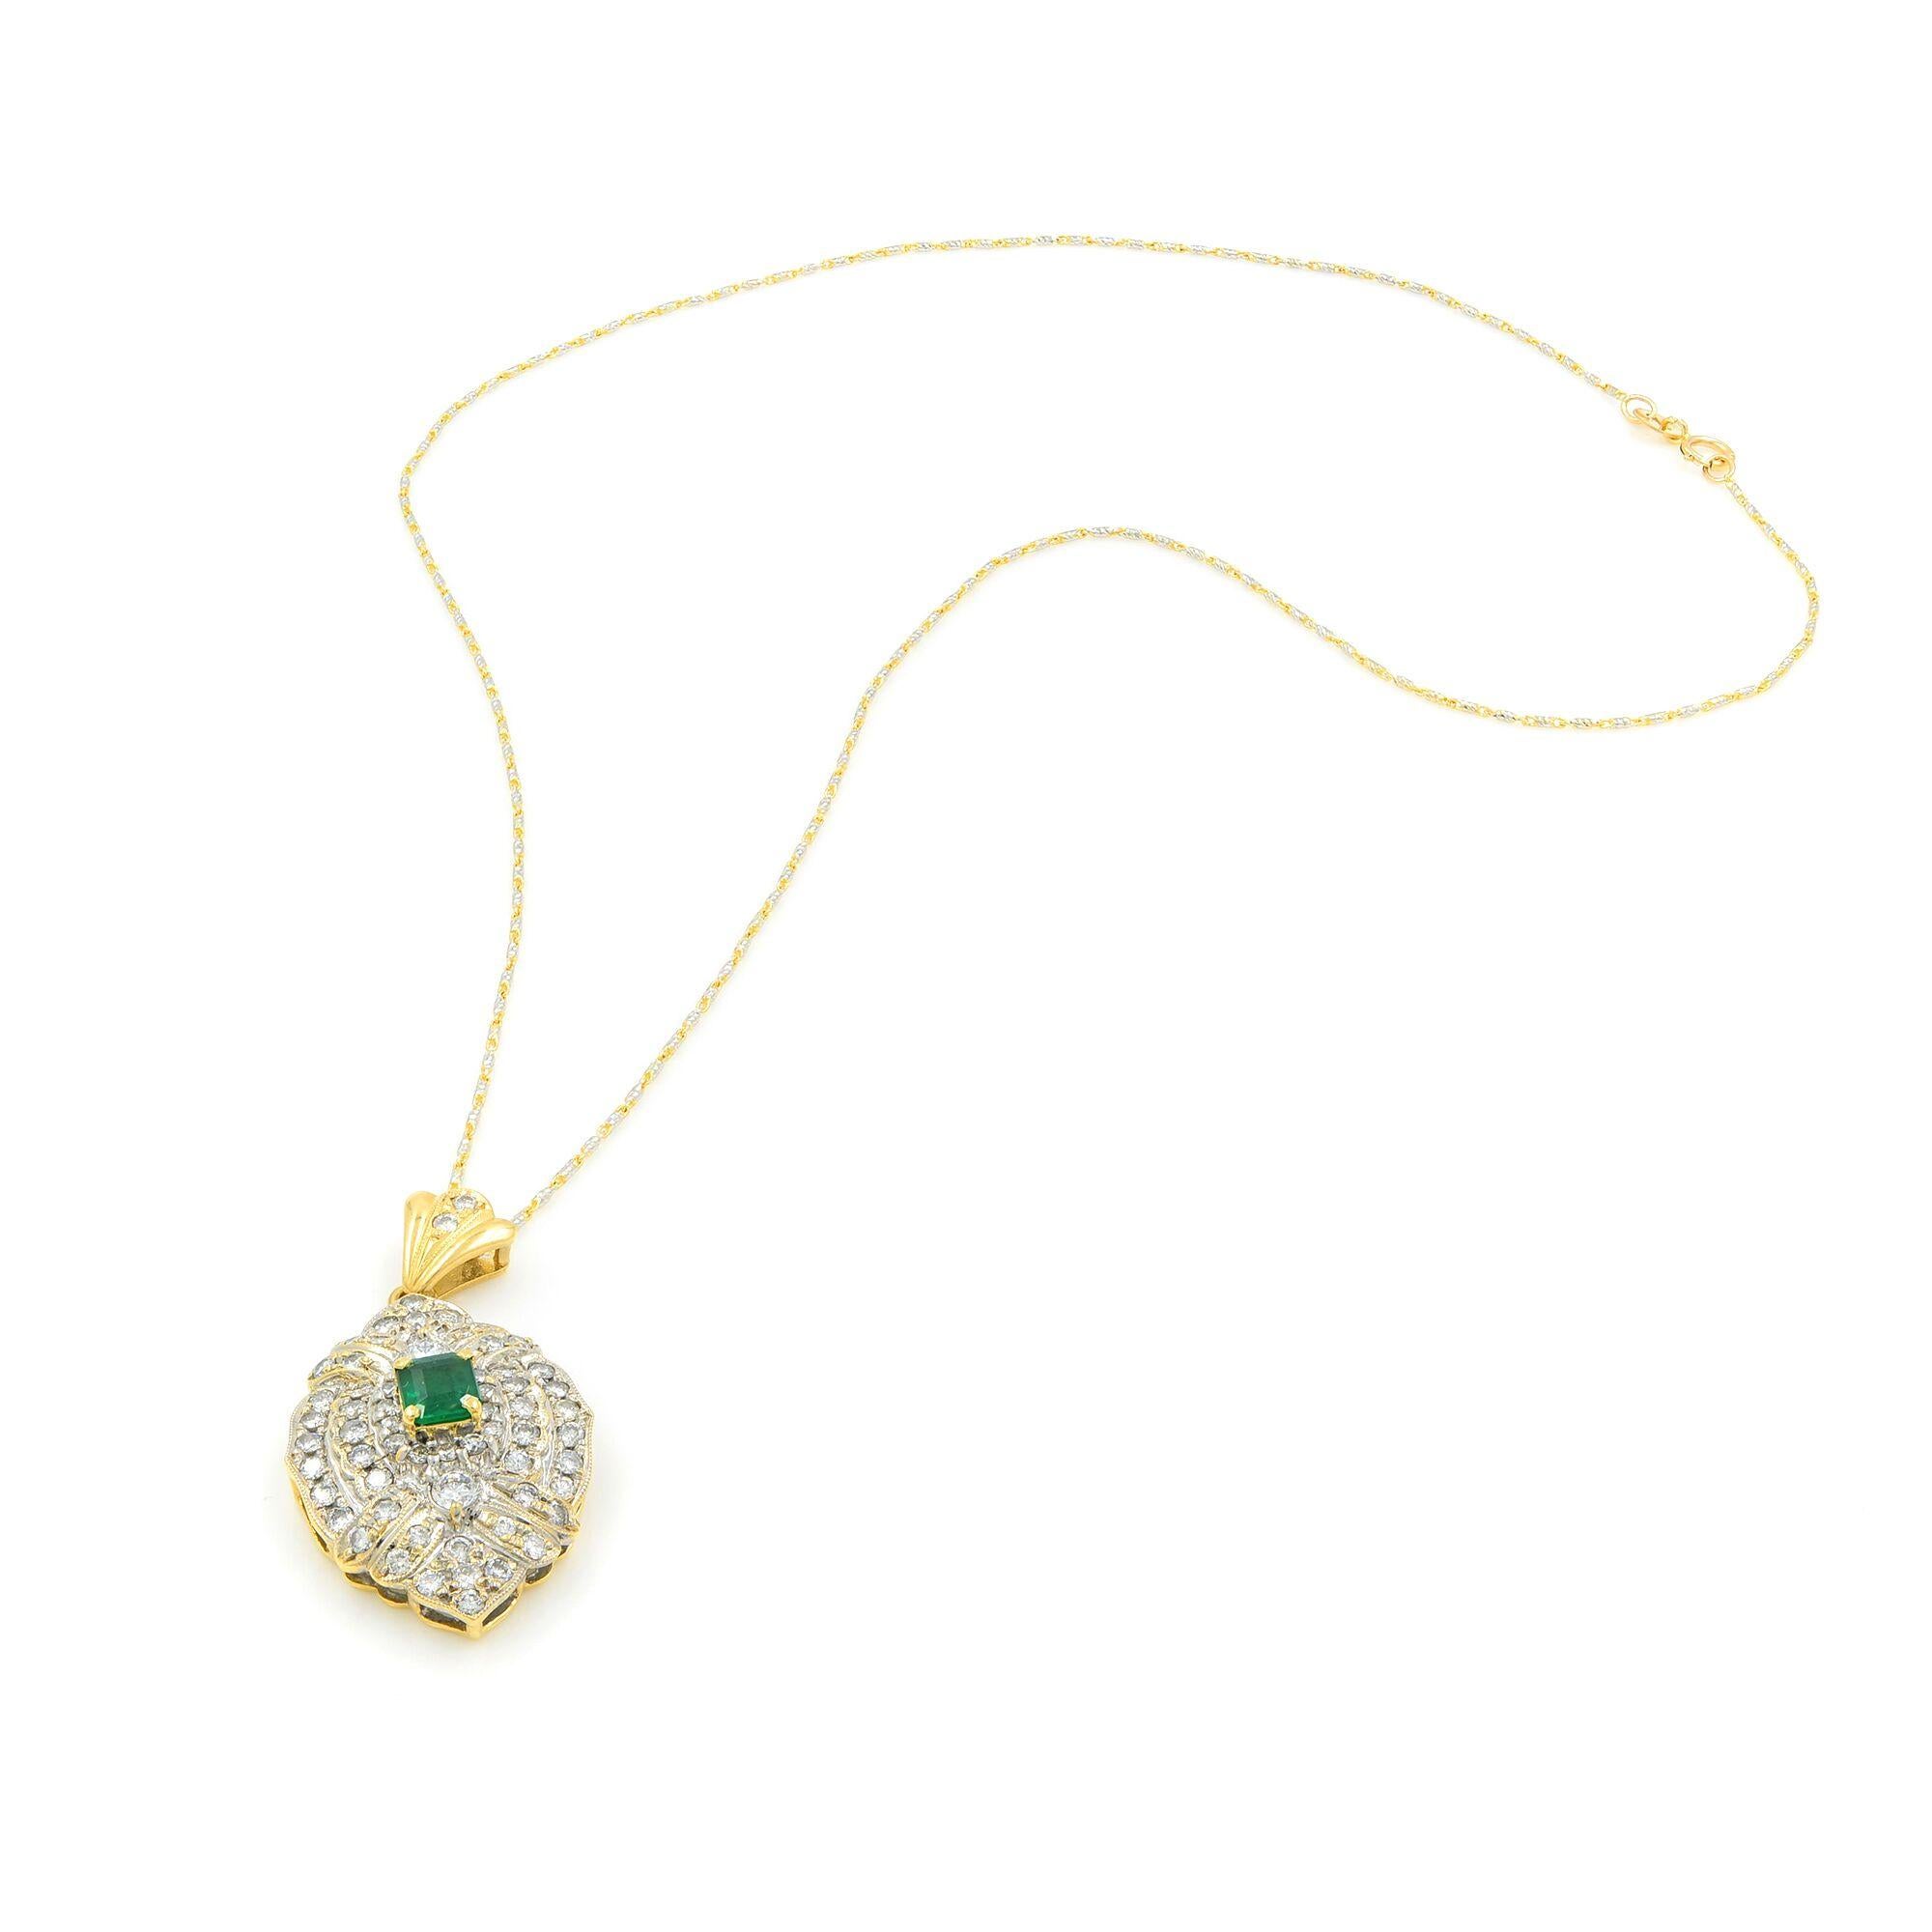 An extra bright, deep green emerald, weighing approx. 0.80ct and mounted on a yellow gold frame that's encrusted with diamonds. This pendant radiates from all the diamonds of this magnificent antique pendant, finely hand-crafted in two tone 18k